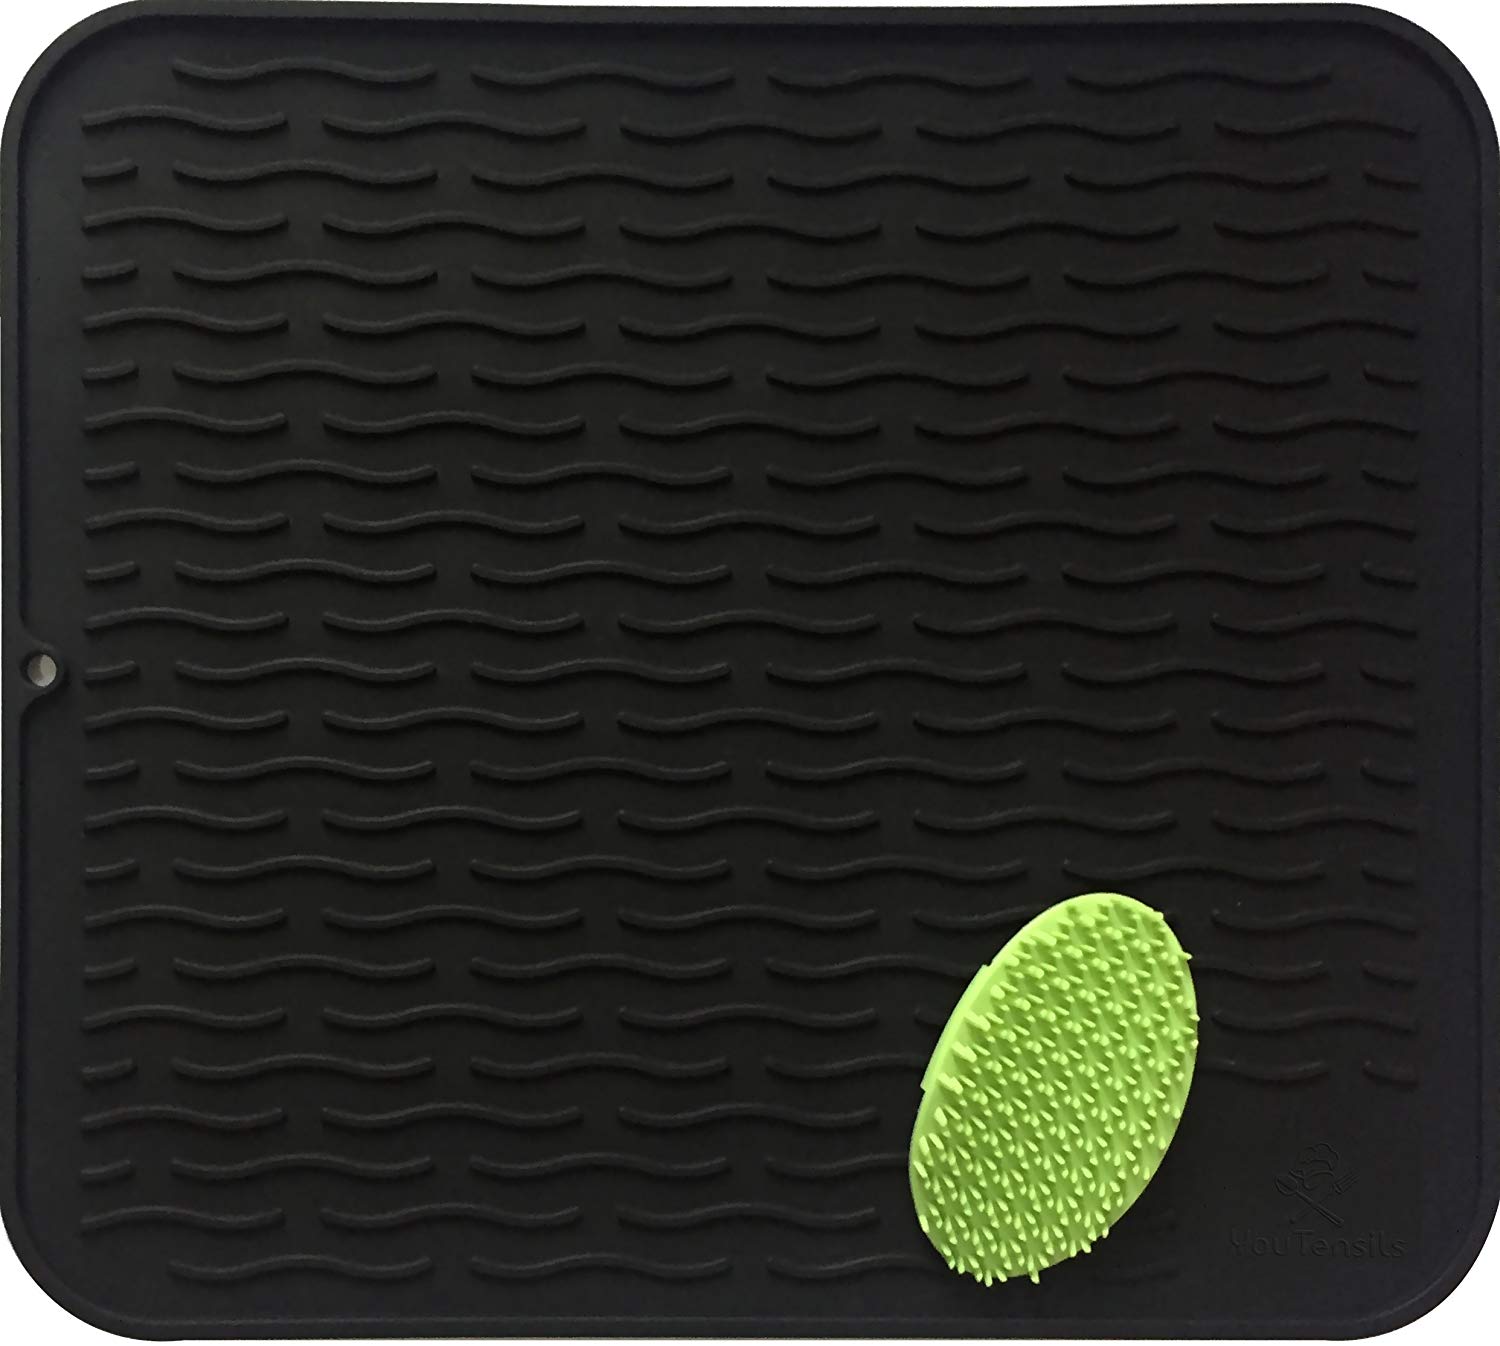 Silicone Dish Drying Mat & Scrubber | Kitchen Dish Drainer Mat & Large Silicone Trivet |Draining Pad for Counter Top | 17.8" x 15.8"